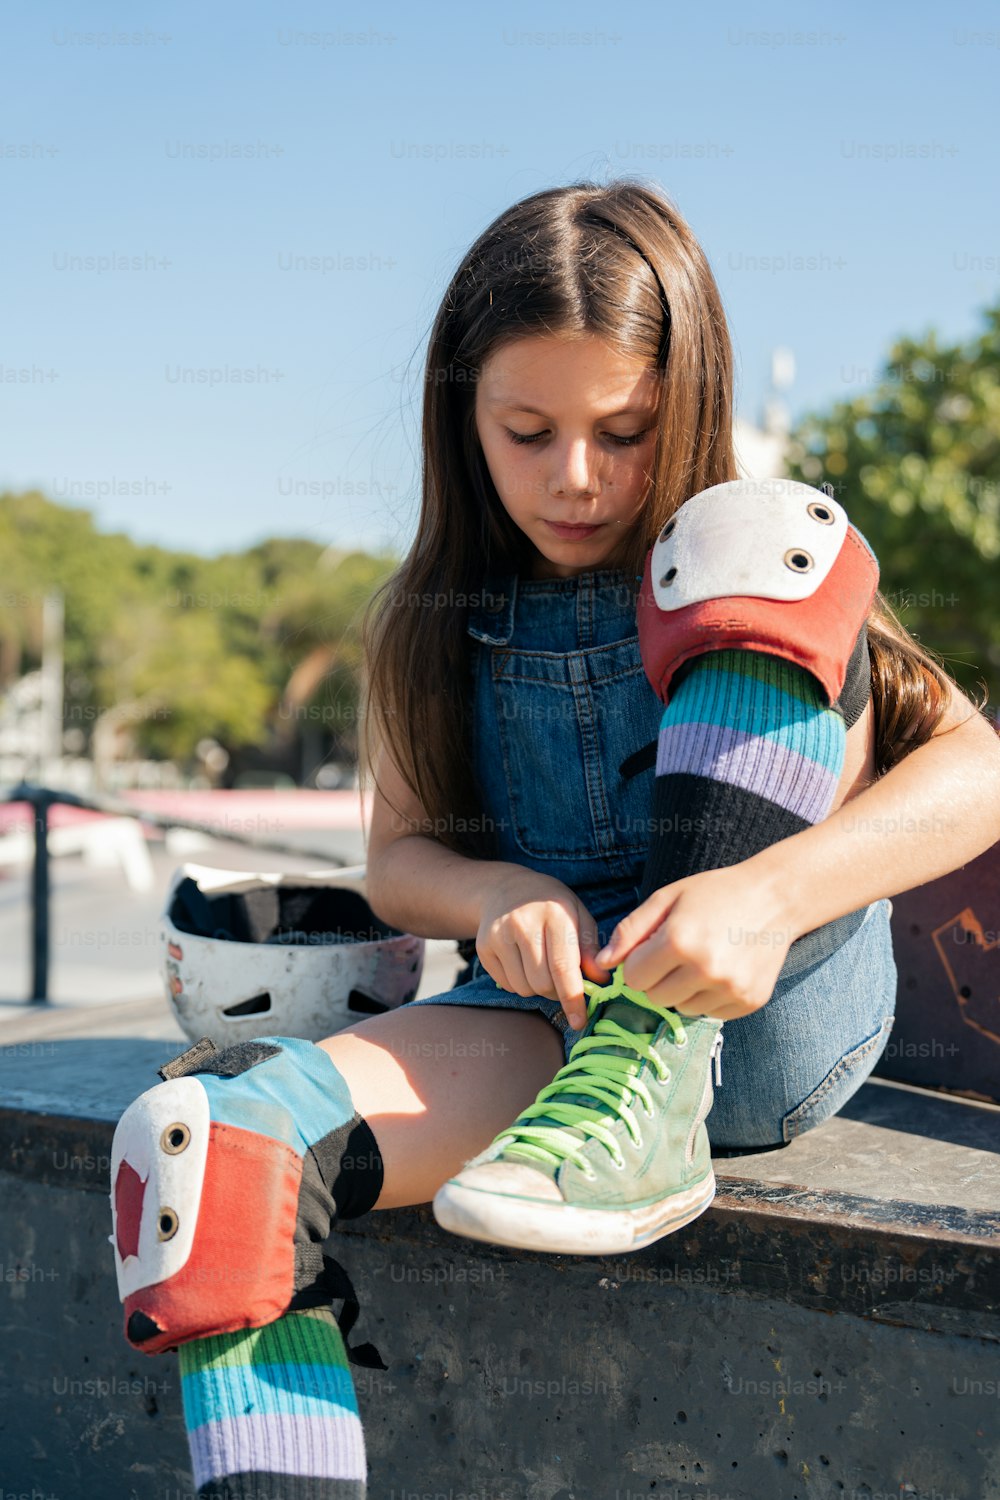 a young girl sitting on a skateboard holding a pair of shoes